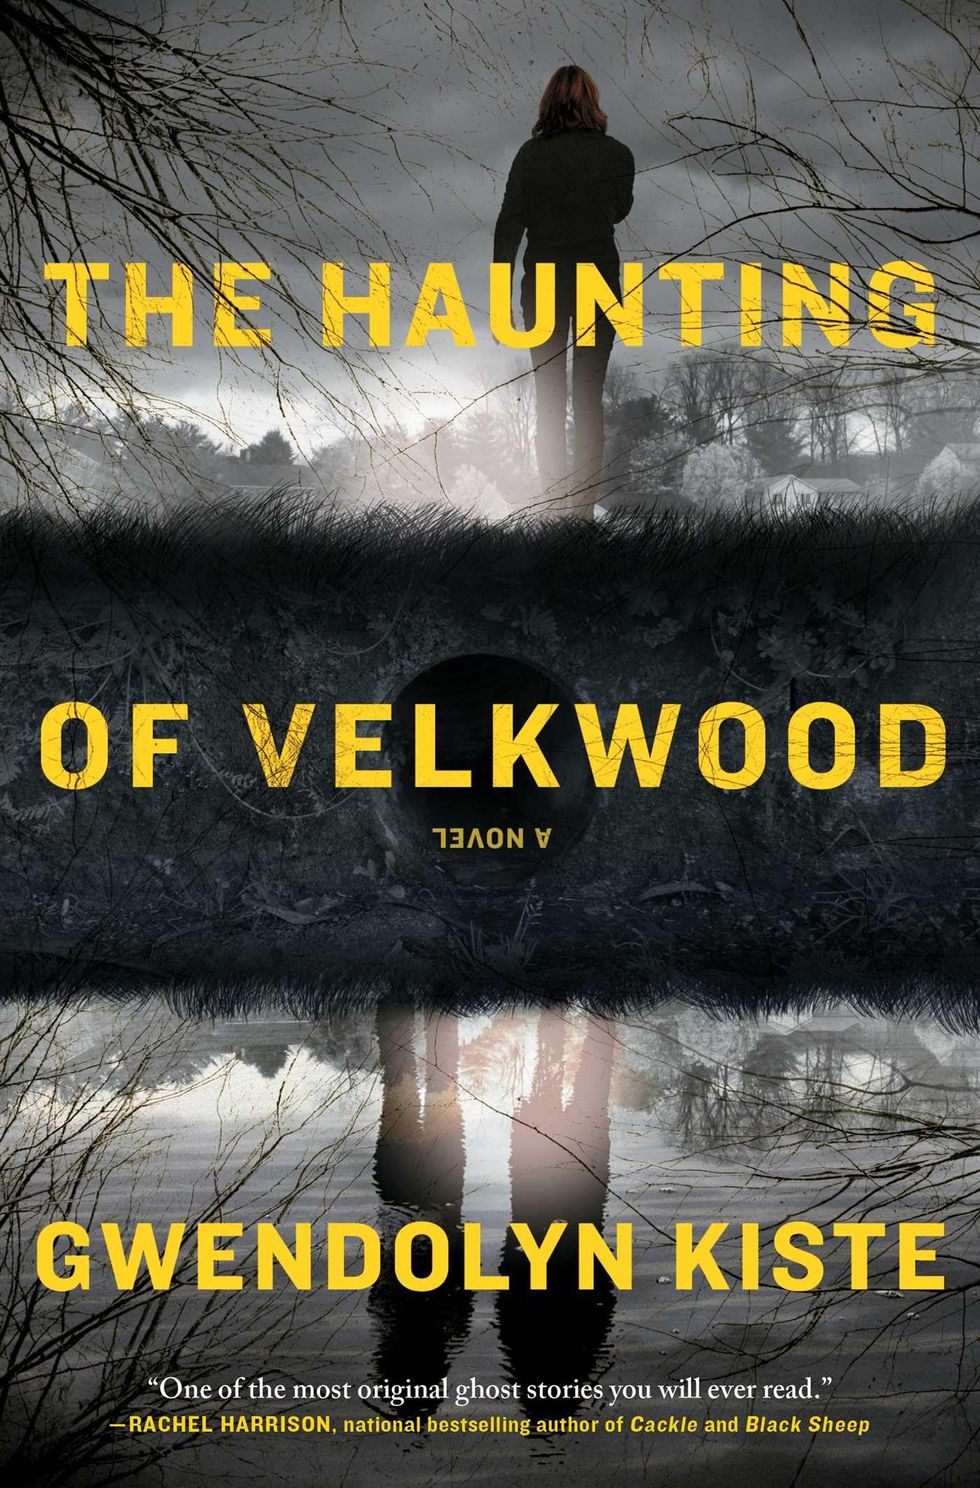 The Haunting of Velkwood, by Gwendolyn Kiste